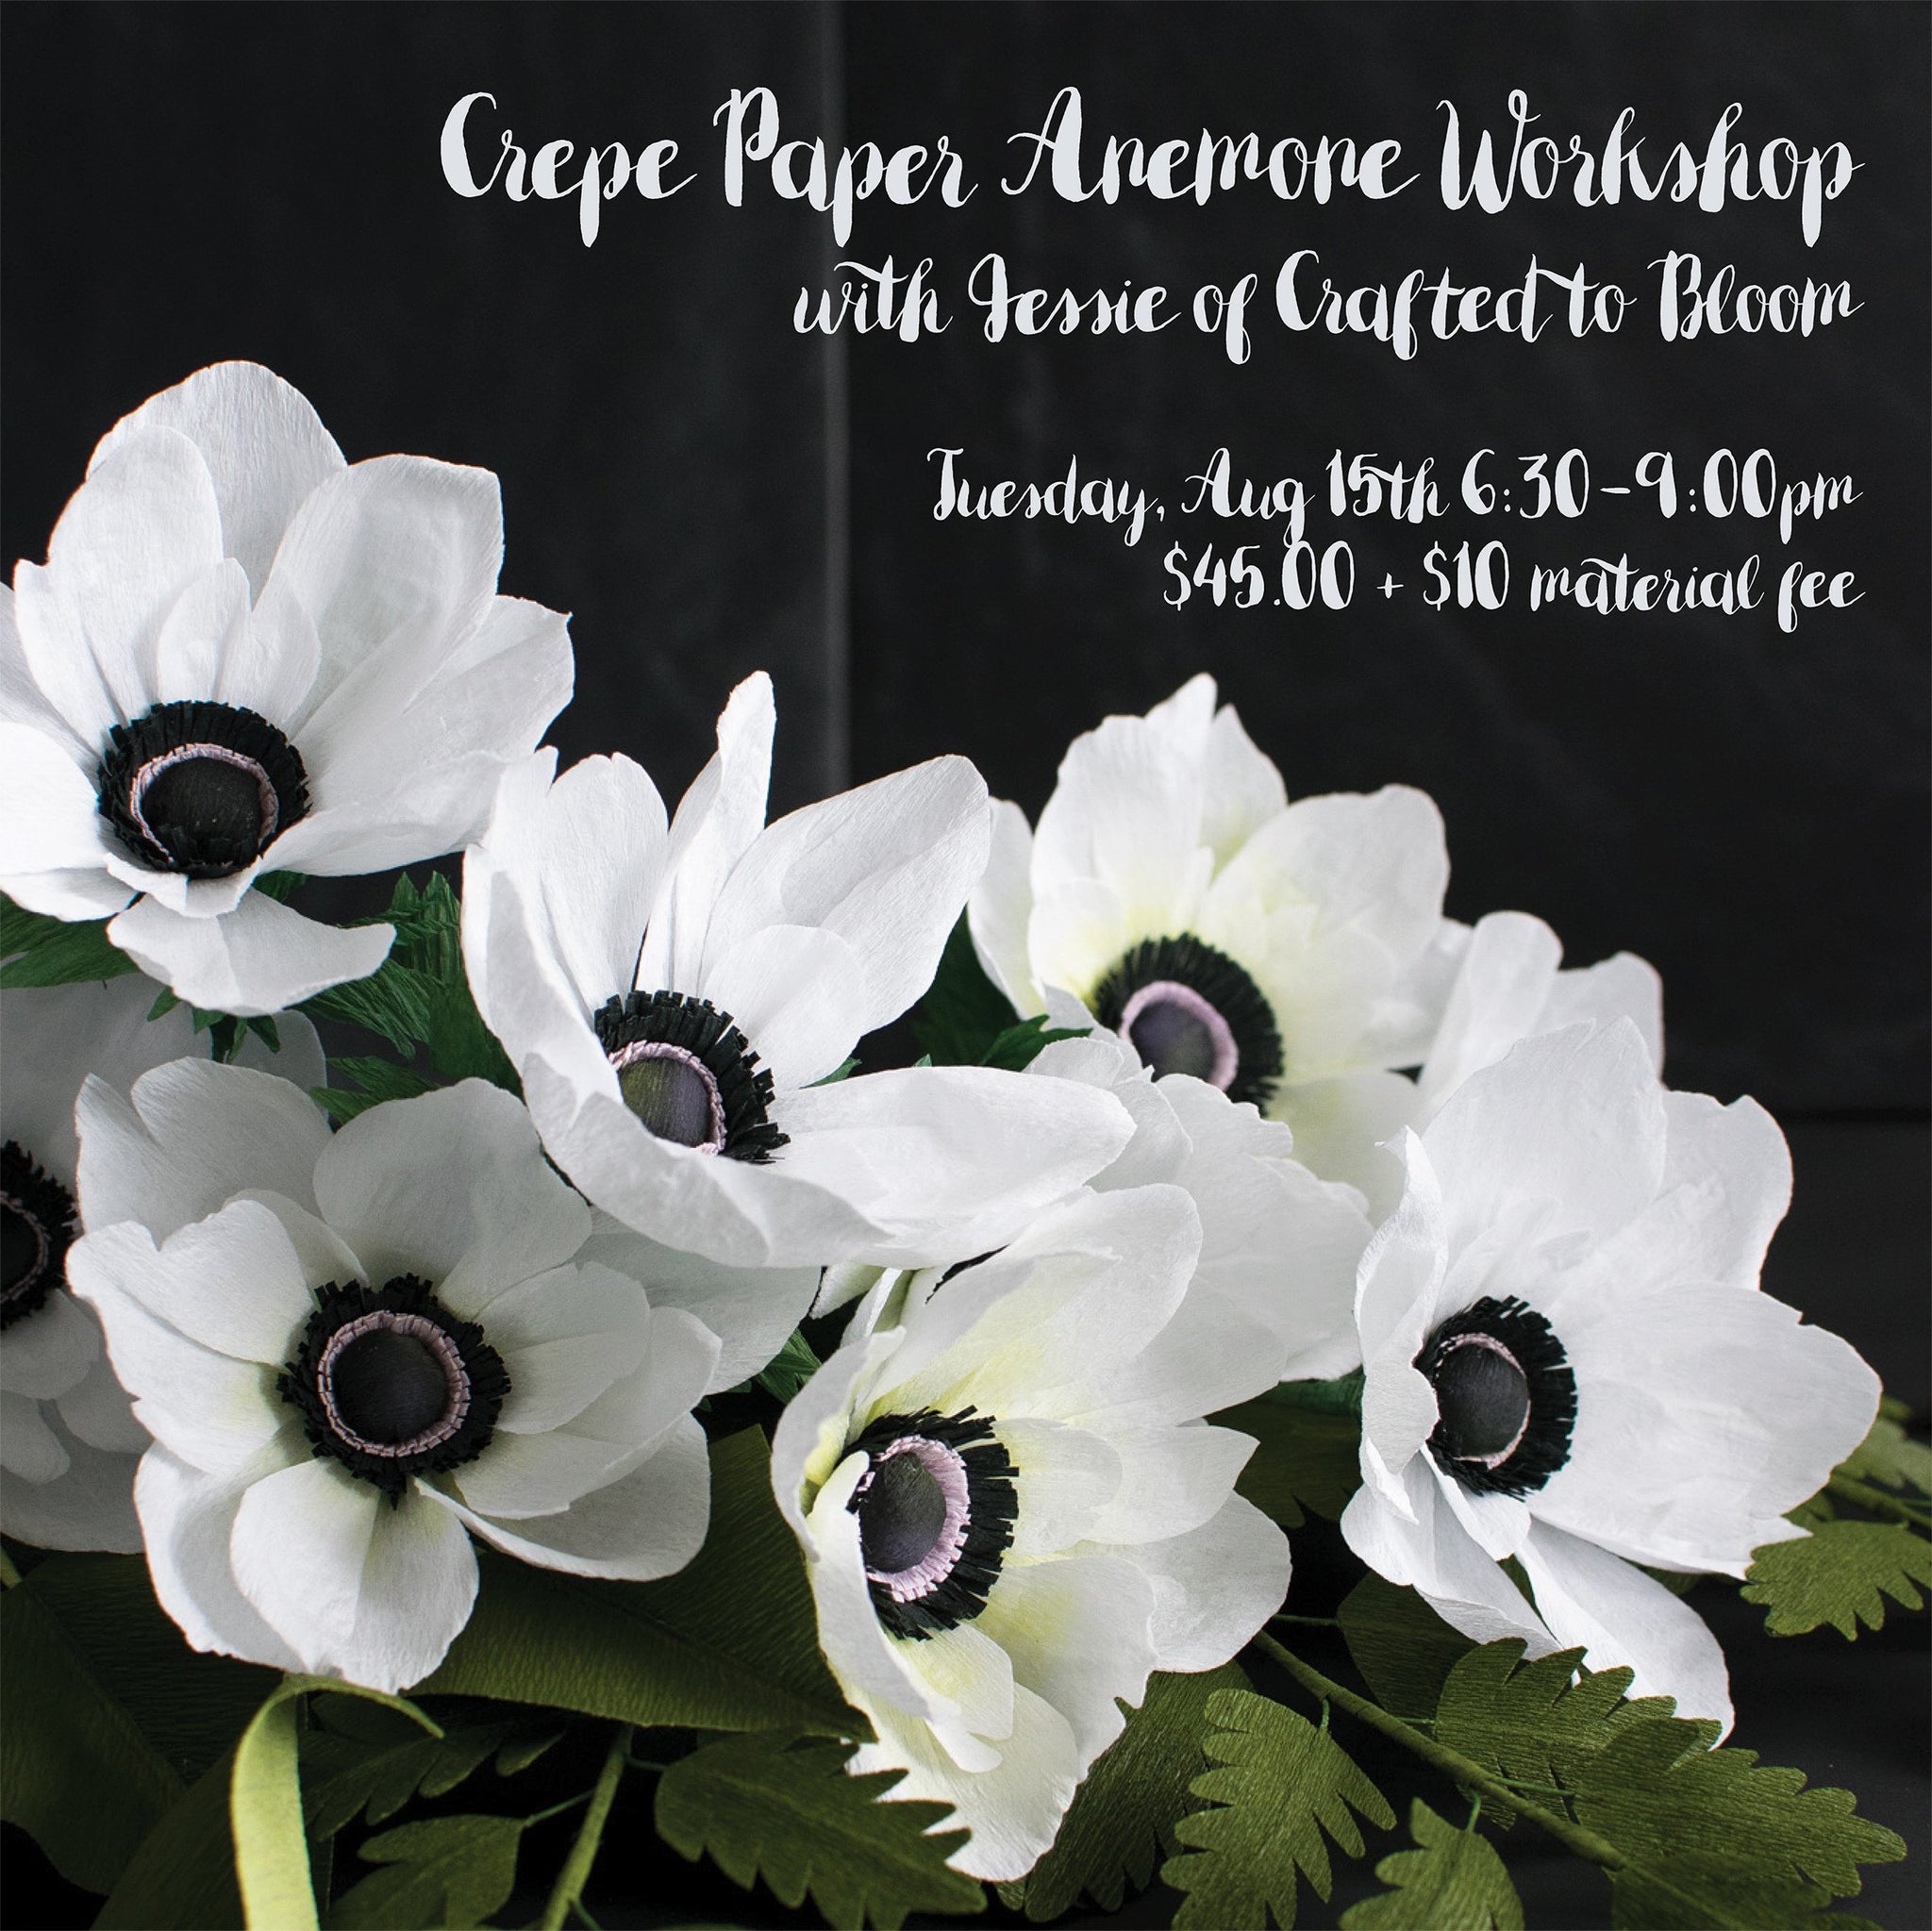 Crepe Paper Anemone Workshop with Jessie of Crafted to Bloom - August 15th, 6:30-9pm